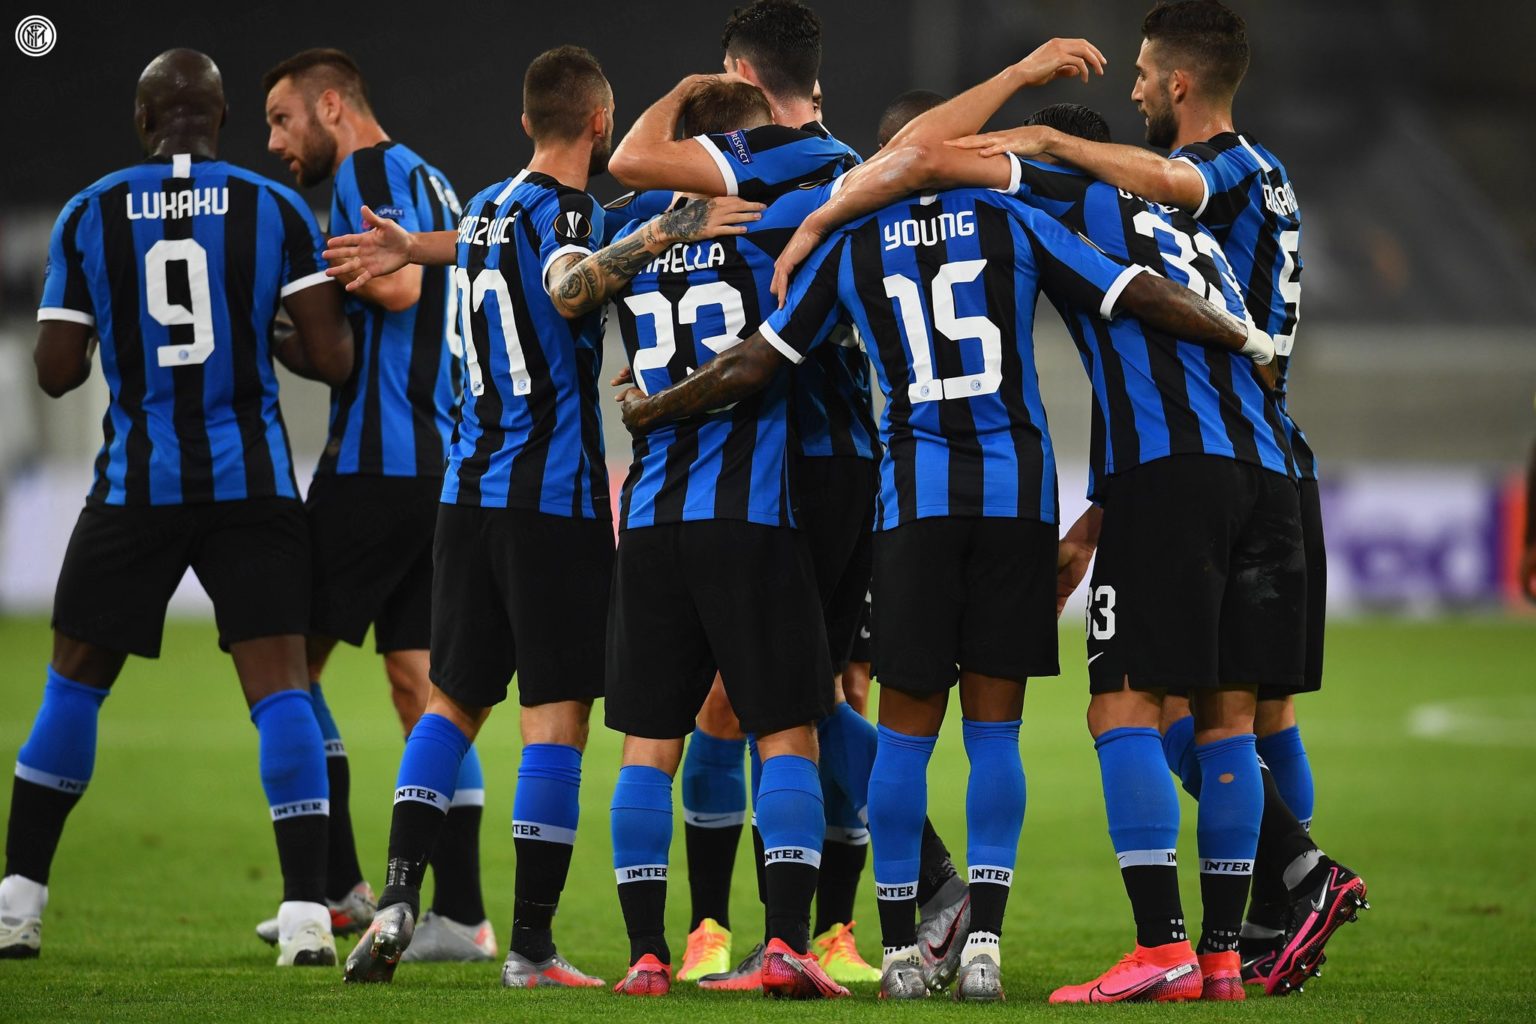 Europa League: Inter Milan gets semi-final ticket after moving past